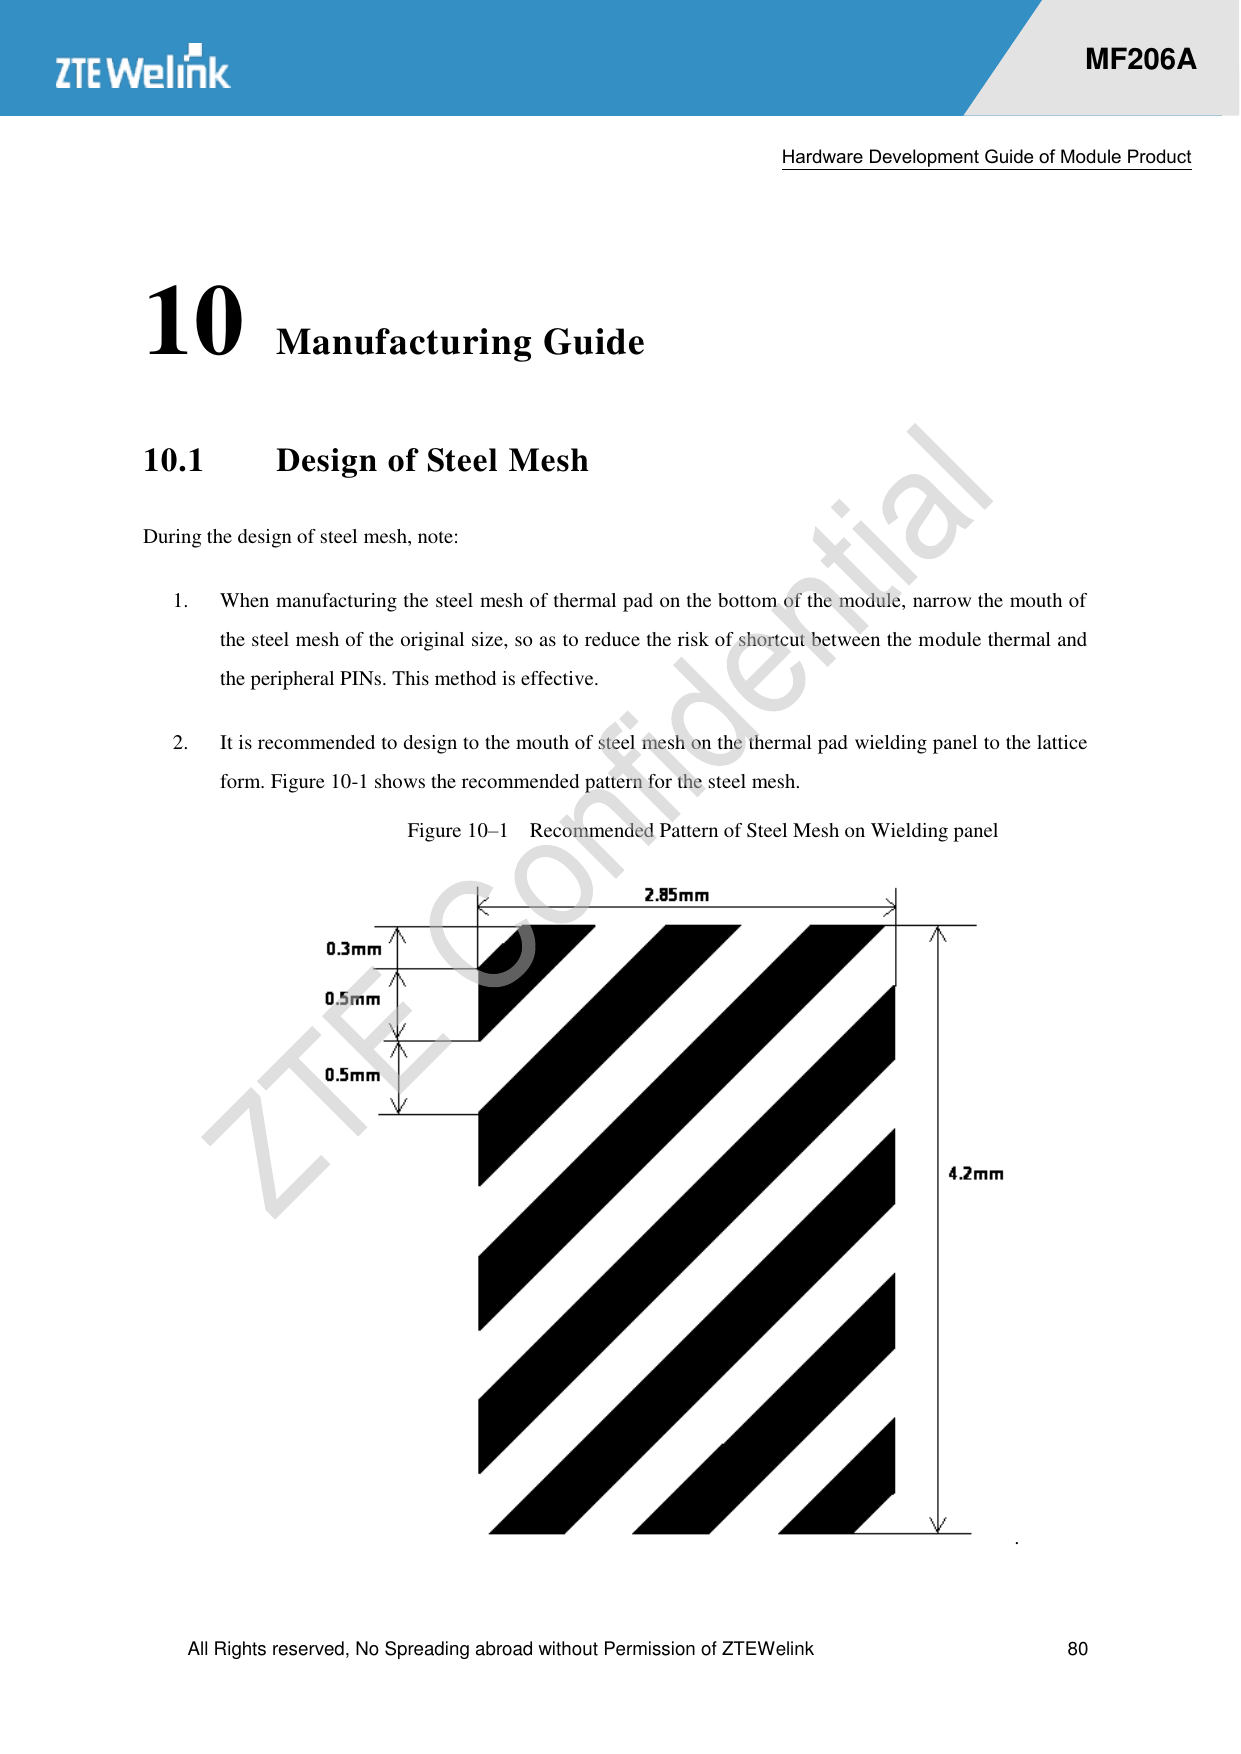  Hardware Development Guide of Module Product  All Rights reserved, No Spreading abroad without Permission of ZTEWelink  80    MF206A 10 Manufacturing Guide 10.1 Design of Steel Mesh During the design of steel mesh, note:   1.  When manufacturing the steel mesh of thermal pad on the bottom of the module, narrow the mouth of the steel mesh of the original size, so as to reduce the risk of shortcut between the module thermal and the peripheral PINs. This method is effective.   2.  It is recommended to design to the mouth of steel mesh on the thermal pad wielding panel to the lattice form. Figure 10-1 shows the recommended pattern for the steel mesh.   Figure 10–1  Recommended Pattern of Steel Mesh on Wielding panel .   